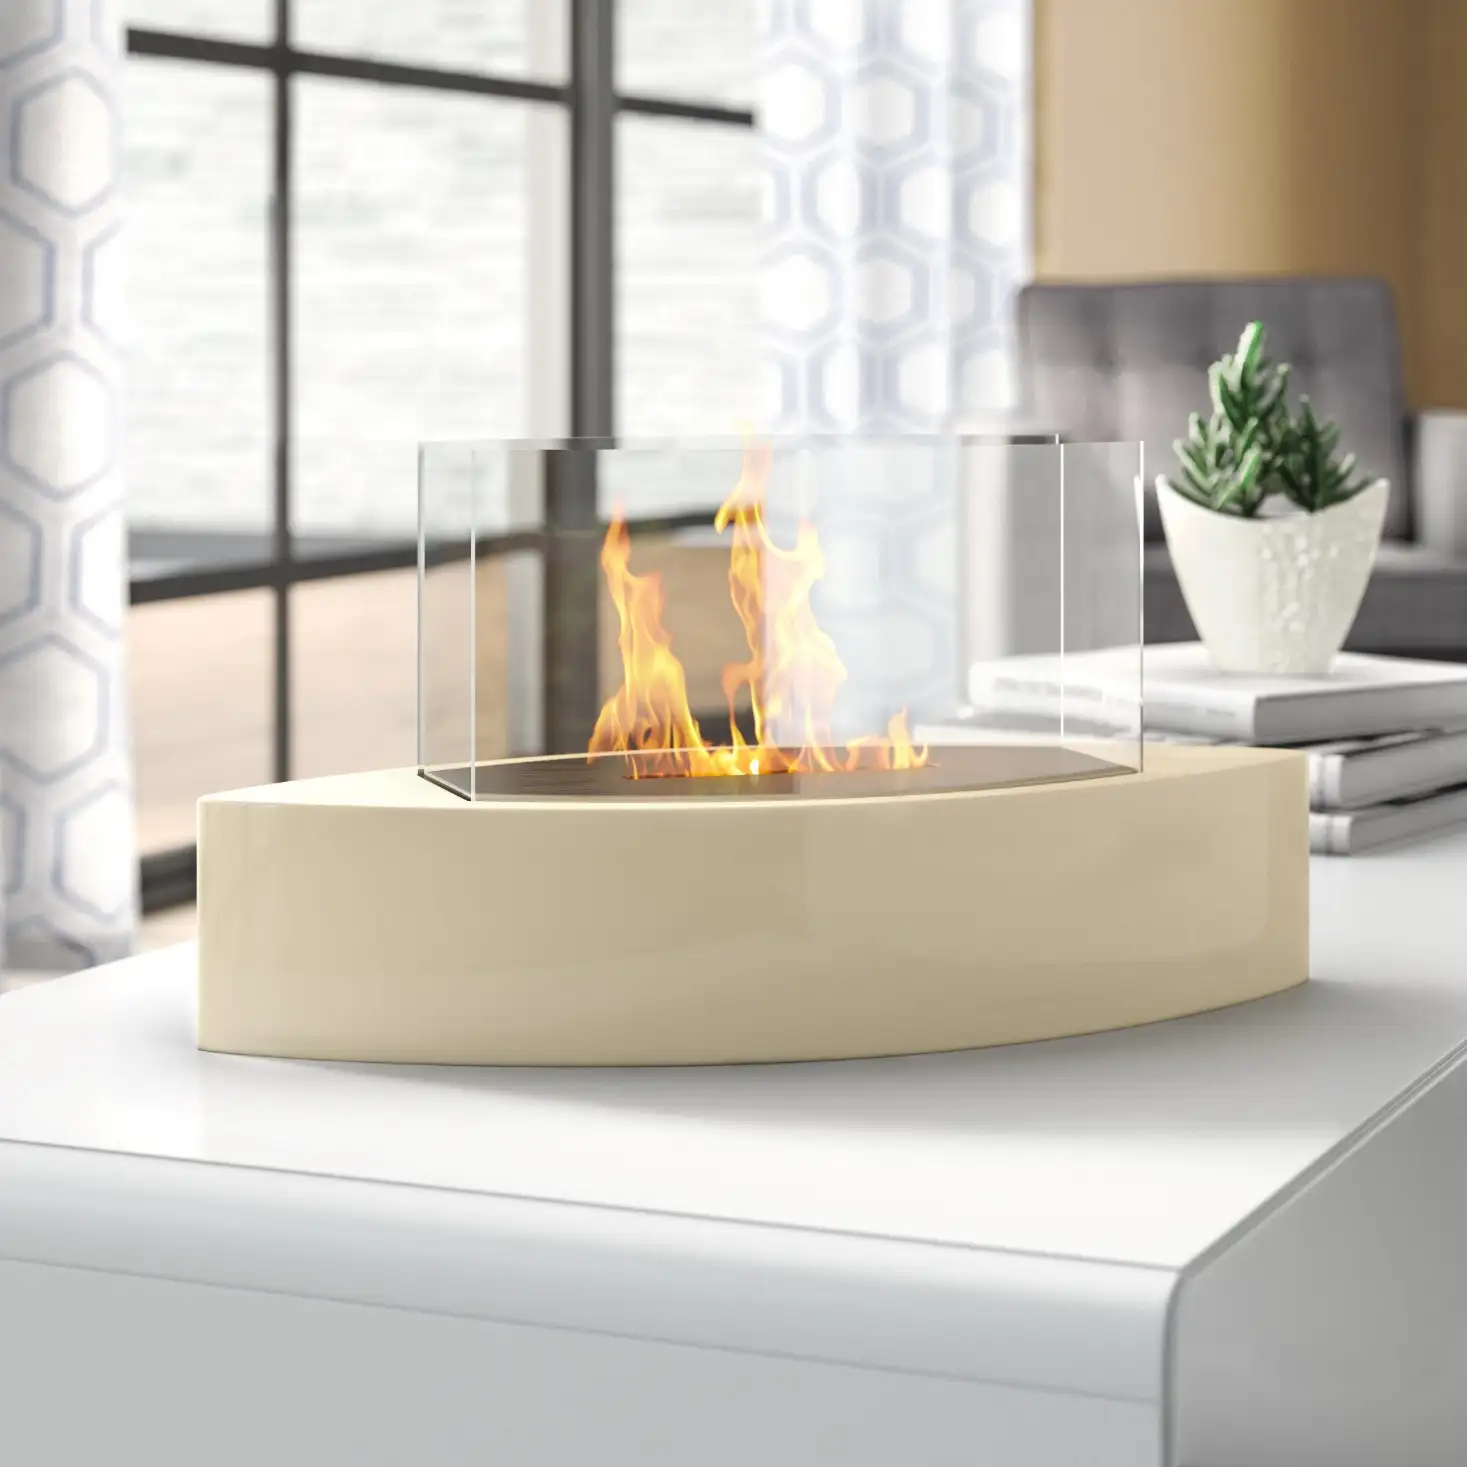 Install A Tabletop Fireplace